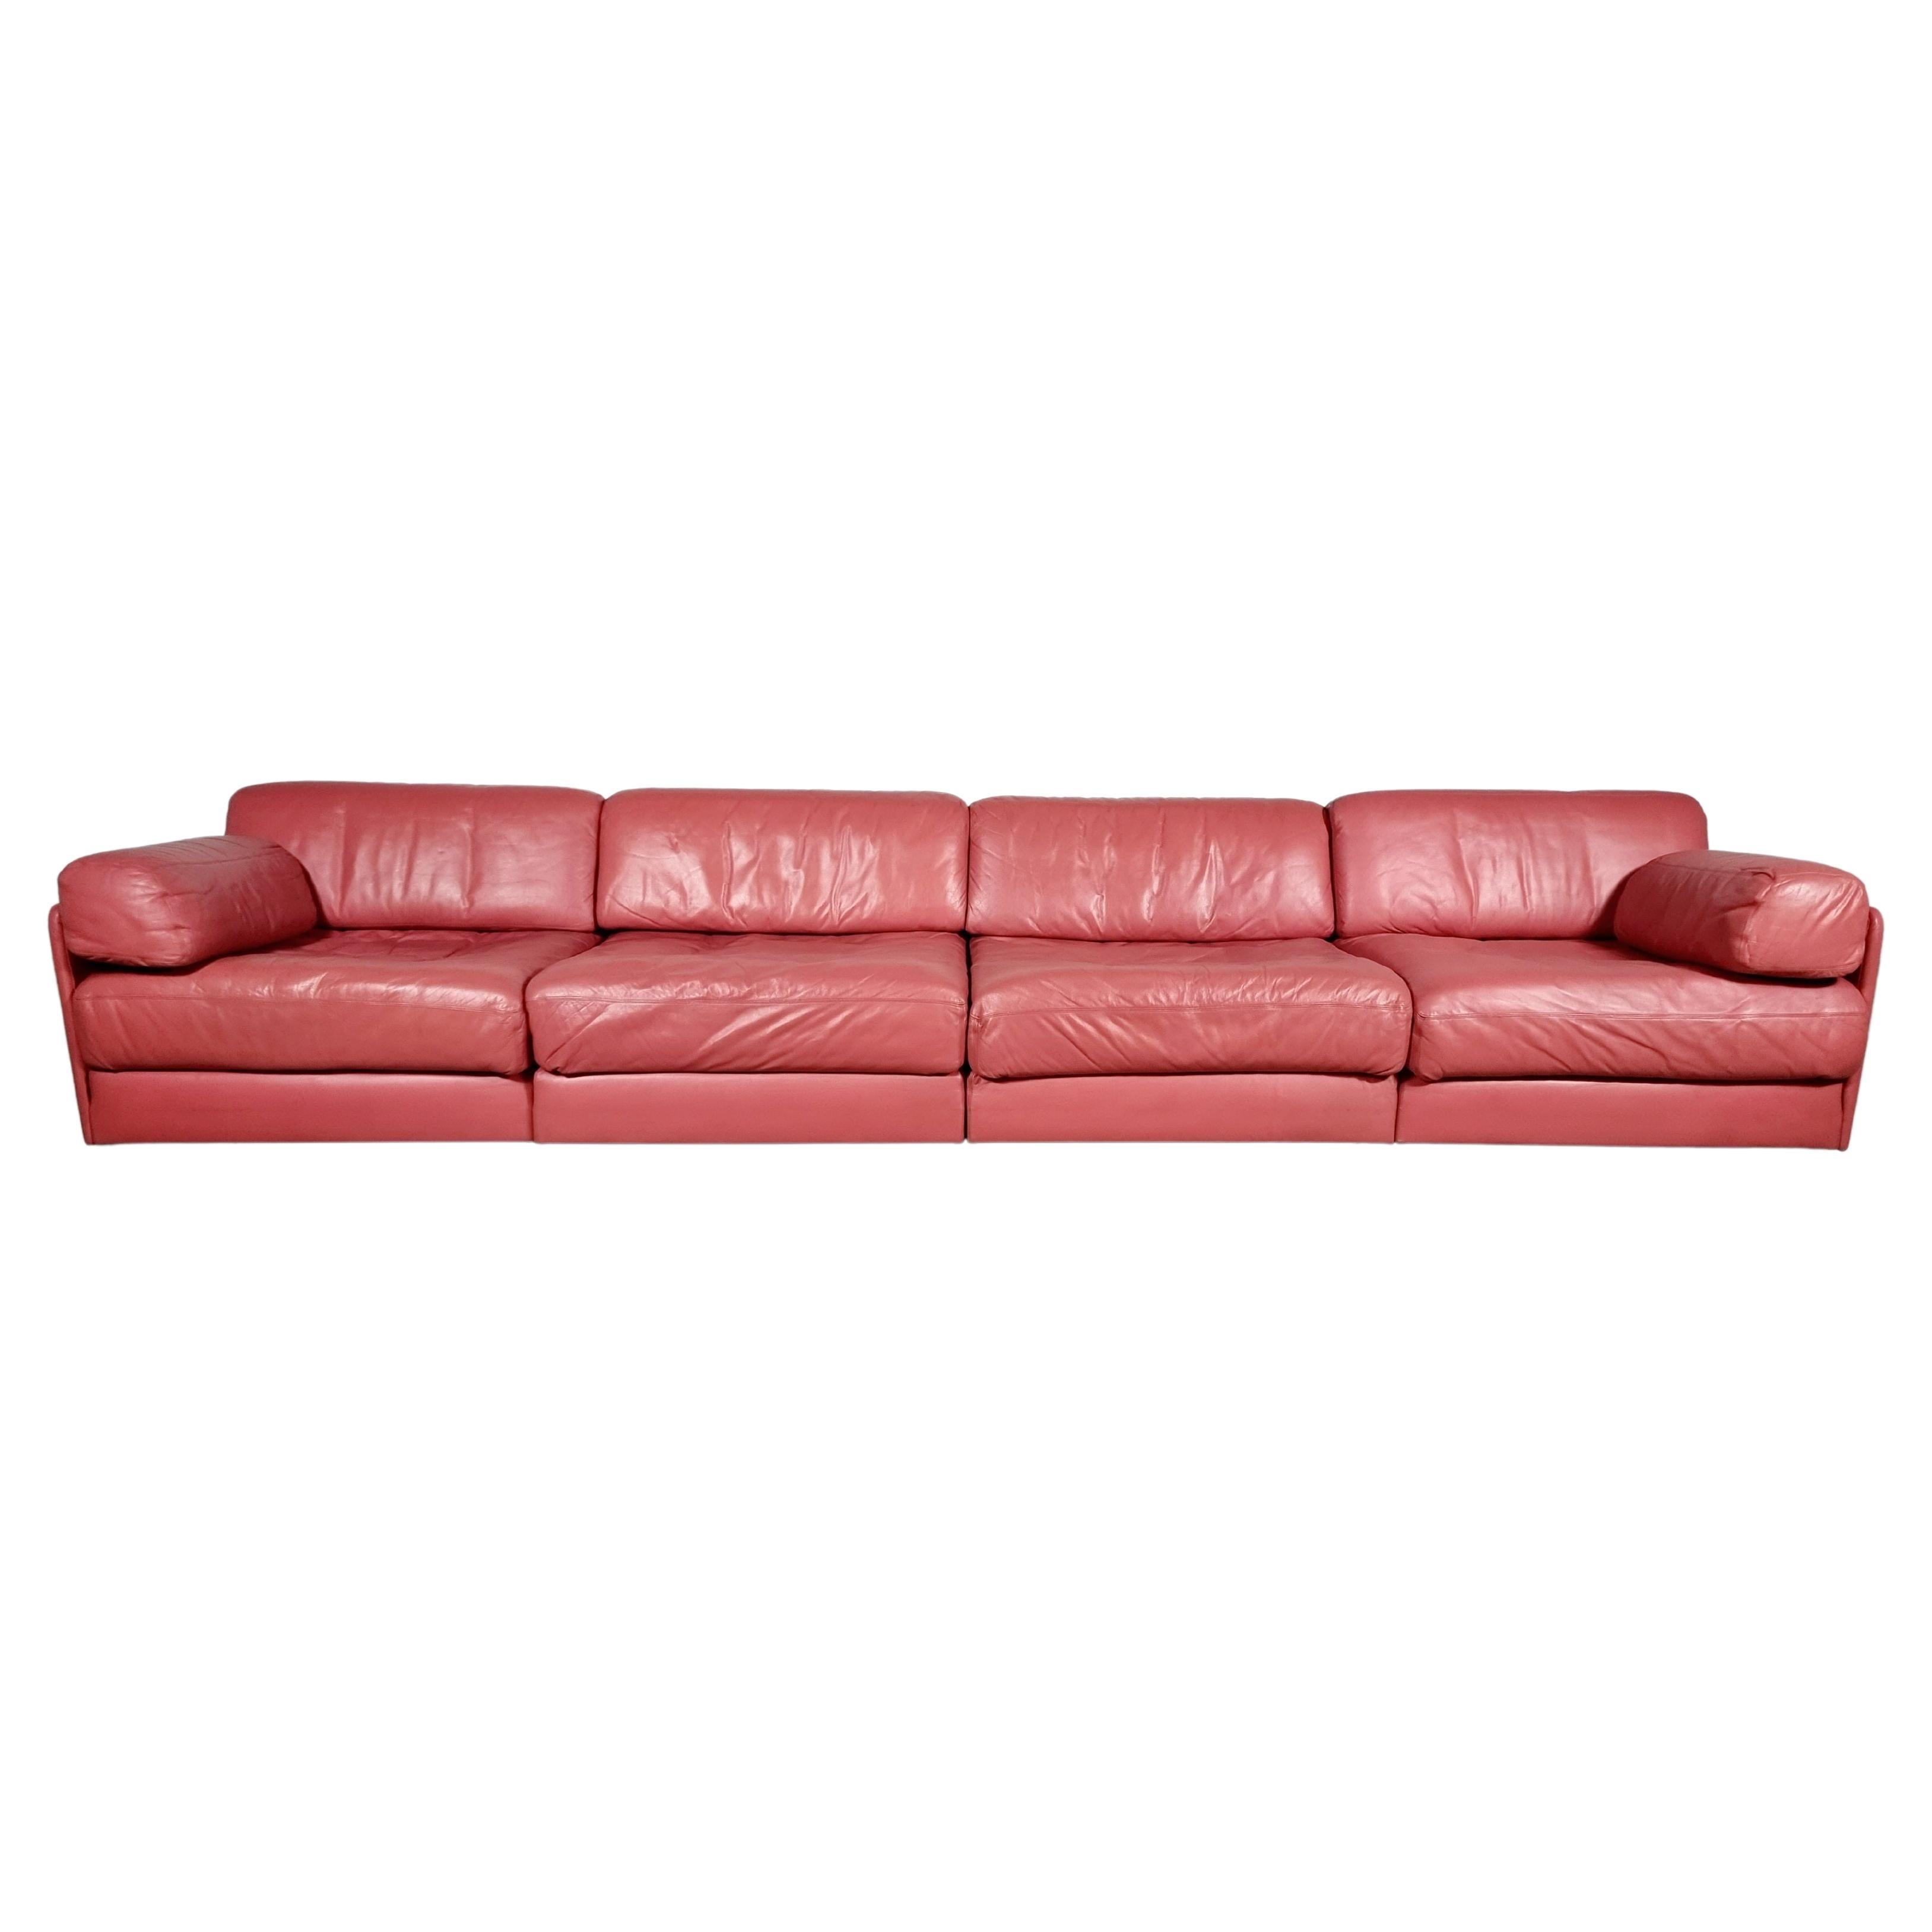 De Sede Ds-76 4-Seater Sectional Sofa, 1970s For Sale at 1stDibs